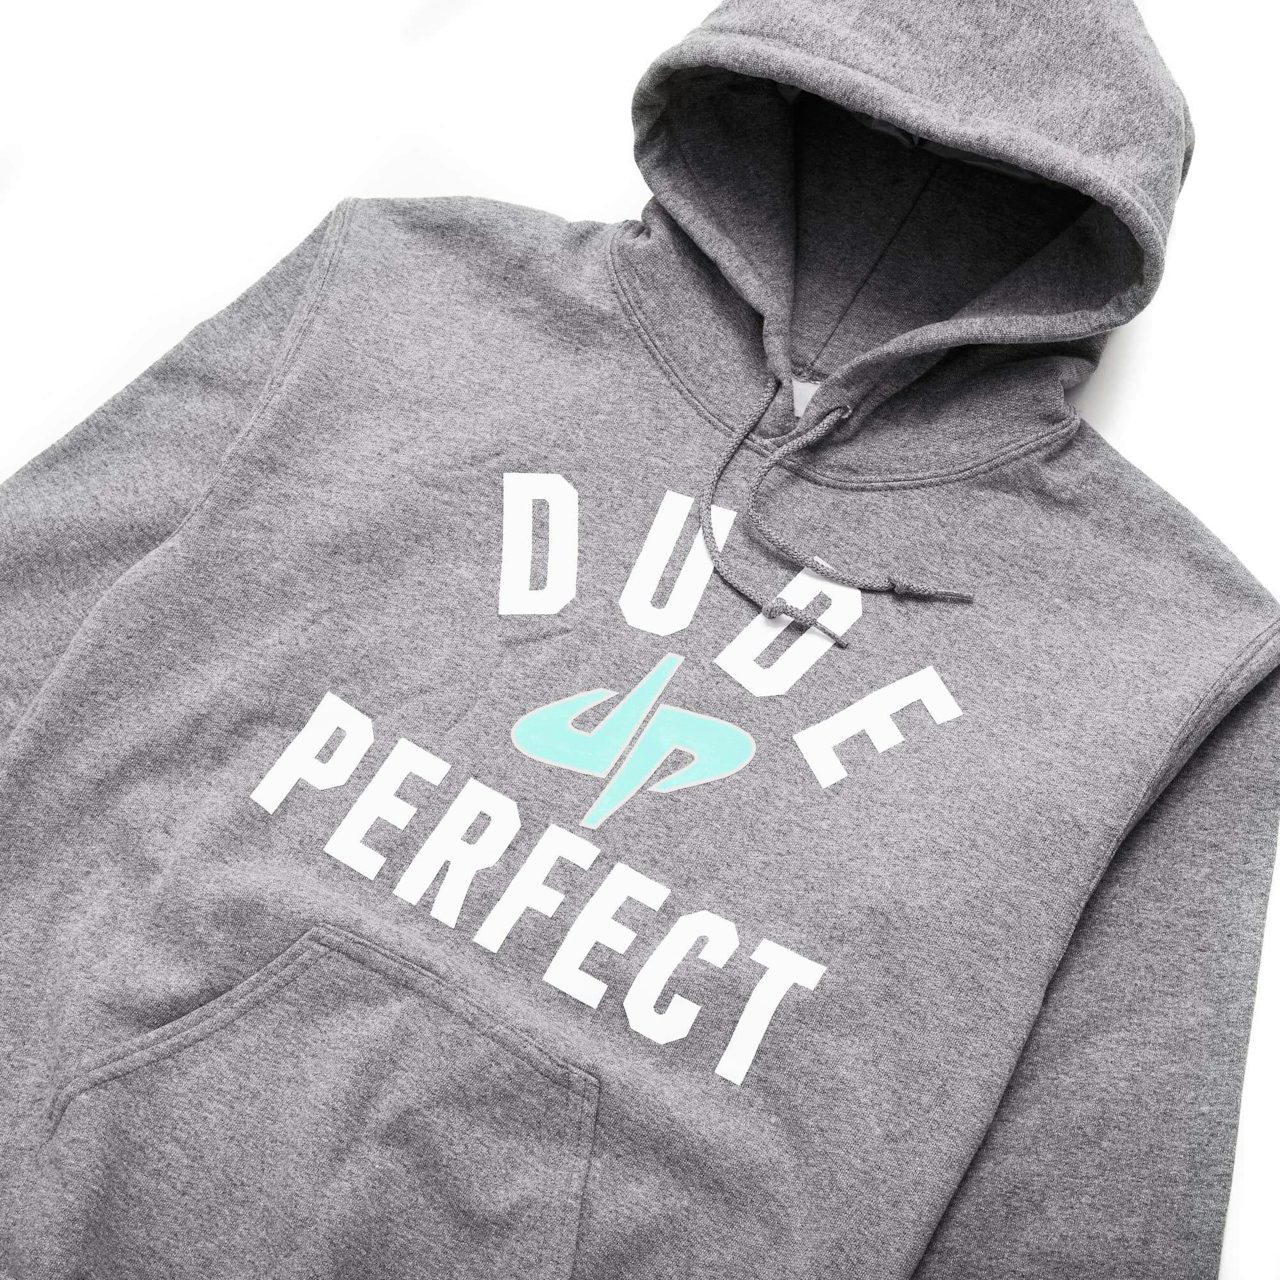 Dude Perfect The G.O.A.T. Hoodie